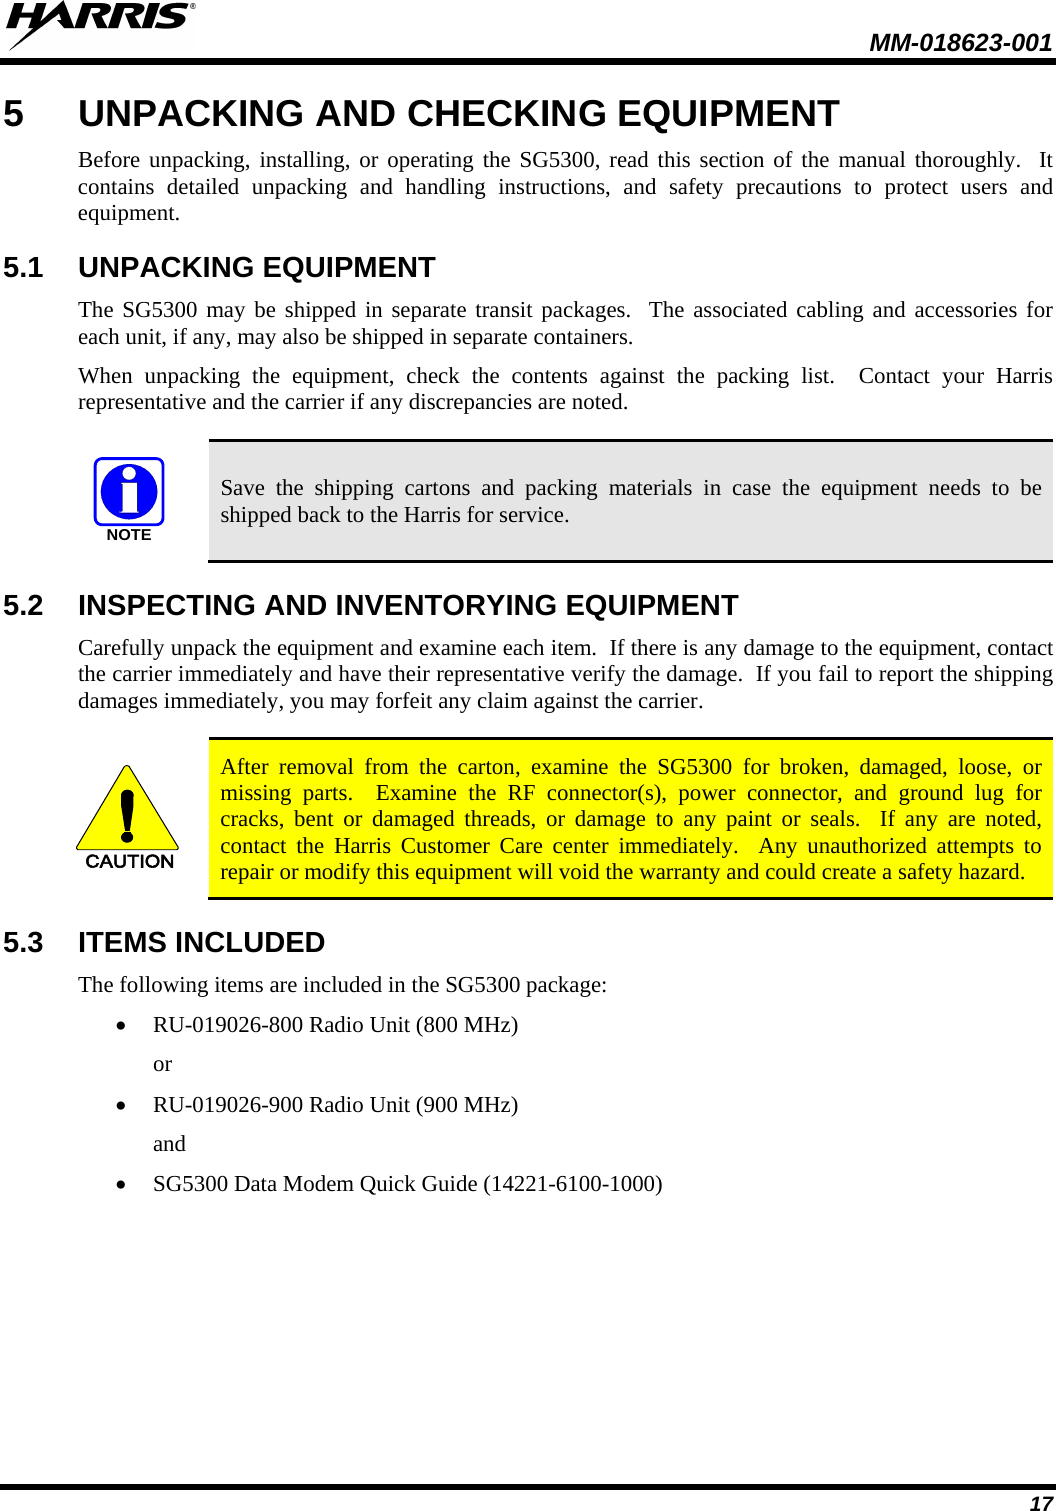  MM-018623-001  17 5  UNPACKING AND CHECKING EQUIPMENT Before unpacking, installing, or operating the SG5300, read this section of the manual thoroughly.  It contains detailed unpacking and handling instructions, and safety precautions to protect users and equipment. 5.1 UNPACKING EQUIPMENT The SG5300 may be shipped in separate transit packages.  The associated cabling and accessories for each unit, if any, may also be shipped in separate containers. When unpacking the equipment, check the contents against the packing list.  Contact your Harris representative and the carrier if any discrepancies are noted.  NOTE Save the shipping cartons and packing materials in case the equipment needs to be shipped back to the Harris for service. 5.2 INSPECTING AND INVENTORYING EQUIPMENT Carefully unpack the equipment and examine each item.  If there is any damage to the equipment, contact the carrier immediately and have their representative verify the damage.  If you fail to report the shipping damages immediately, you may forfeit any claim against the carrier.  CAUTION After removal from the carton, examine the SG5300 for broken, damaged, loose, or missing parts.  Examine the RF connector(s), power connector,  and ground lug for cracks, bent or damaged threads, or damage to any paint or seals.  If any are noted, contact the Harris  Customer  Care  center immediately.  Any unauthorized attempts to repair or modify this equipment will void the warranty and could create a safety hazard. 5.3 ITEMS INCLUDED The following items are included in the SG5300 package: • RU-019026-800 Radio Unit (800 MHz) or  • RU-019026-900 Radio Unit (900 MHz) and • SG5300 Data Modem Quick Guide (14221-6100-1000) 